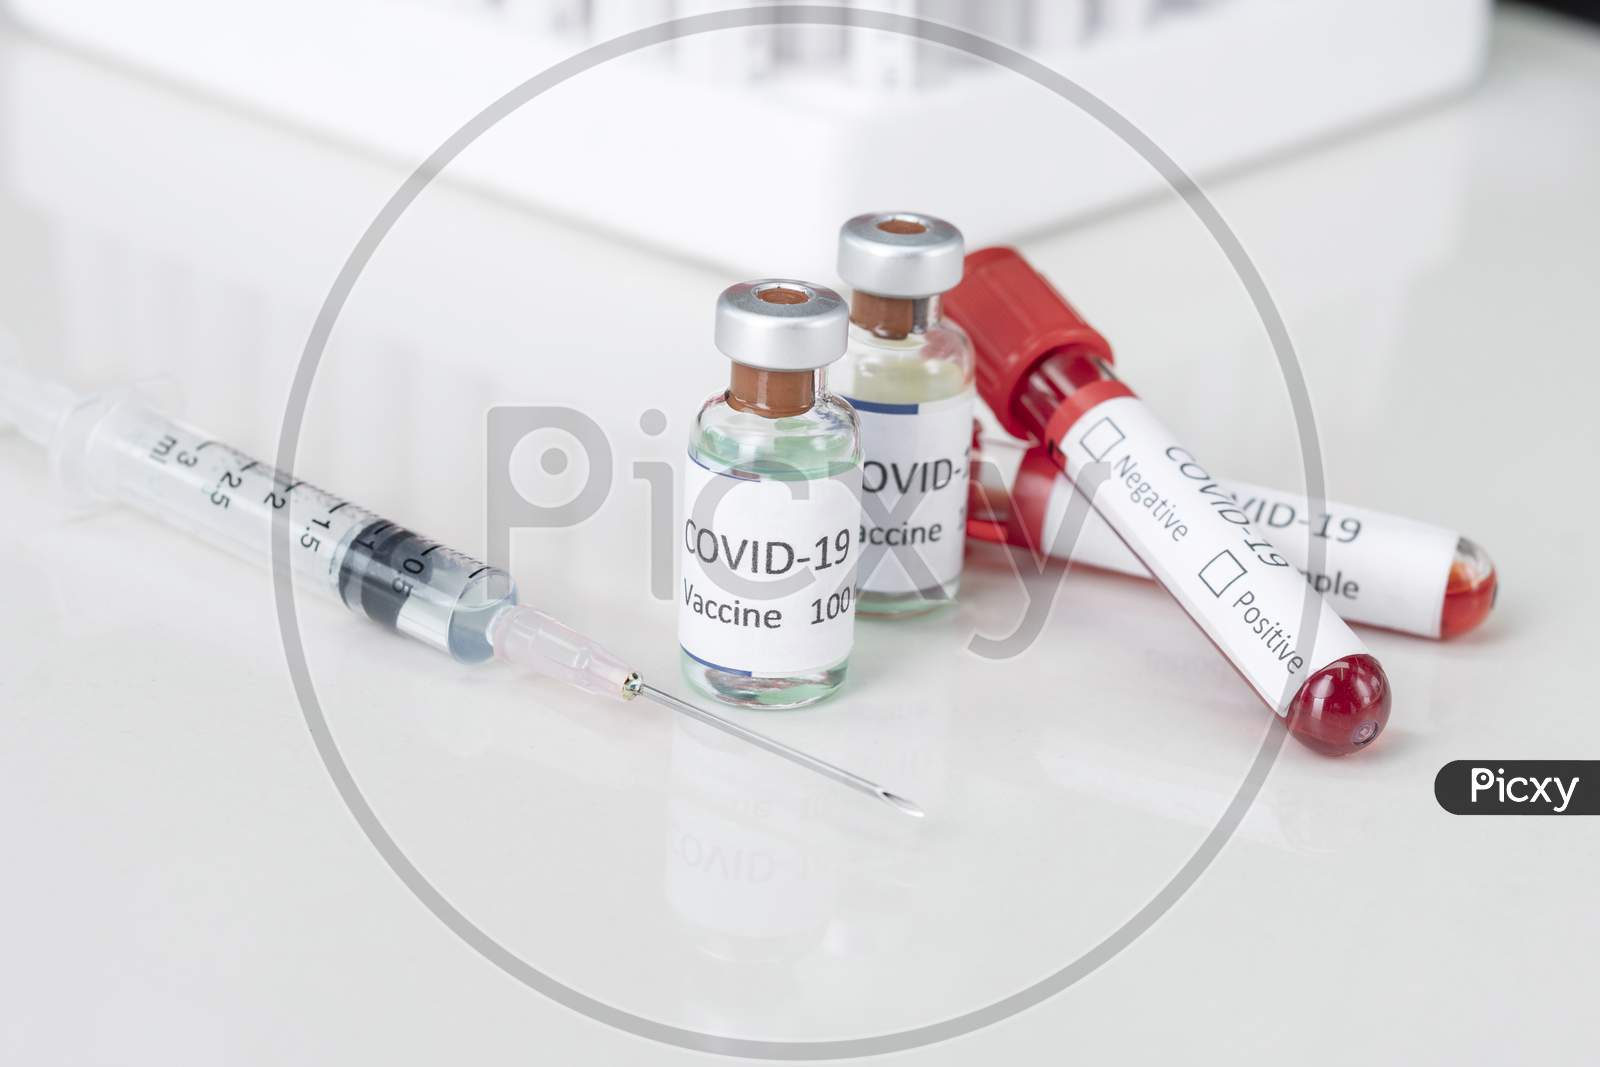 Nobel Coronavirus Covid-19 Vaccine Vial A Illustrative Picture, Doctor In The Laboratory With A Biological Tube For Analysis And Sampling Of Covid-19 Infectious Disea.